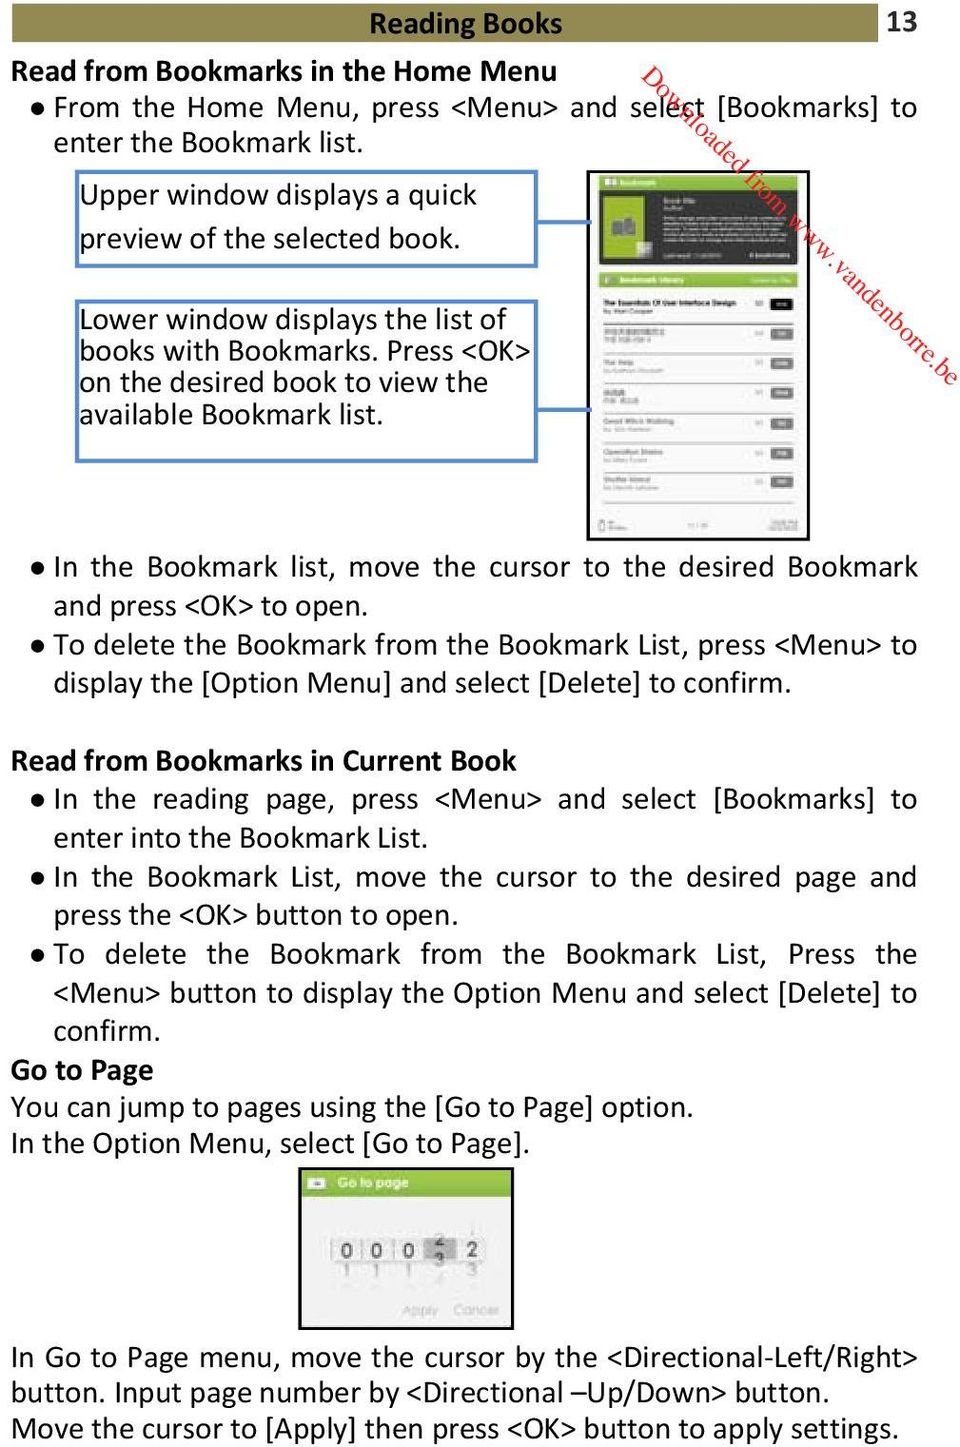 In the Bookmark list, move the cursor to the desired Bookmark and press <OK> to open.